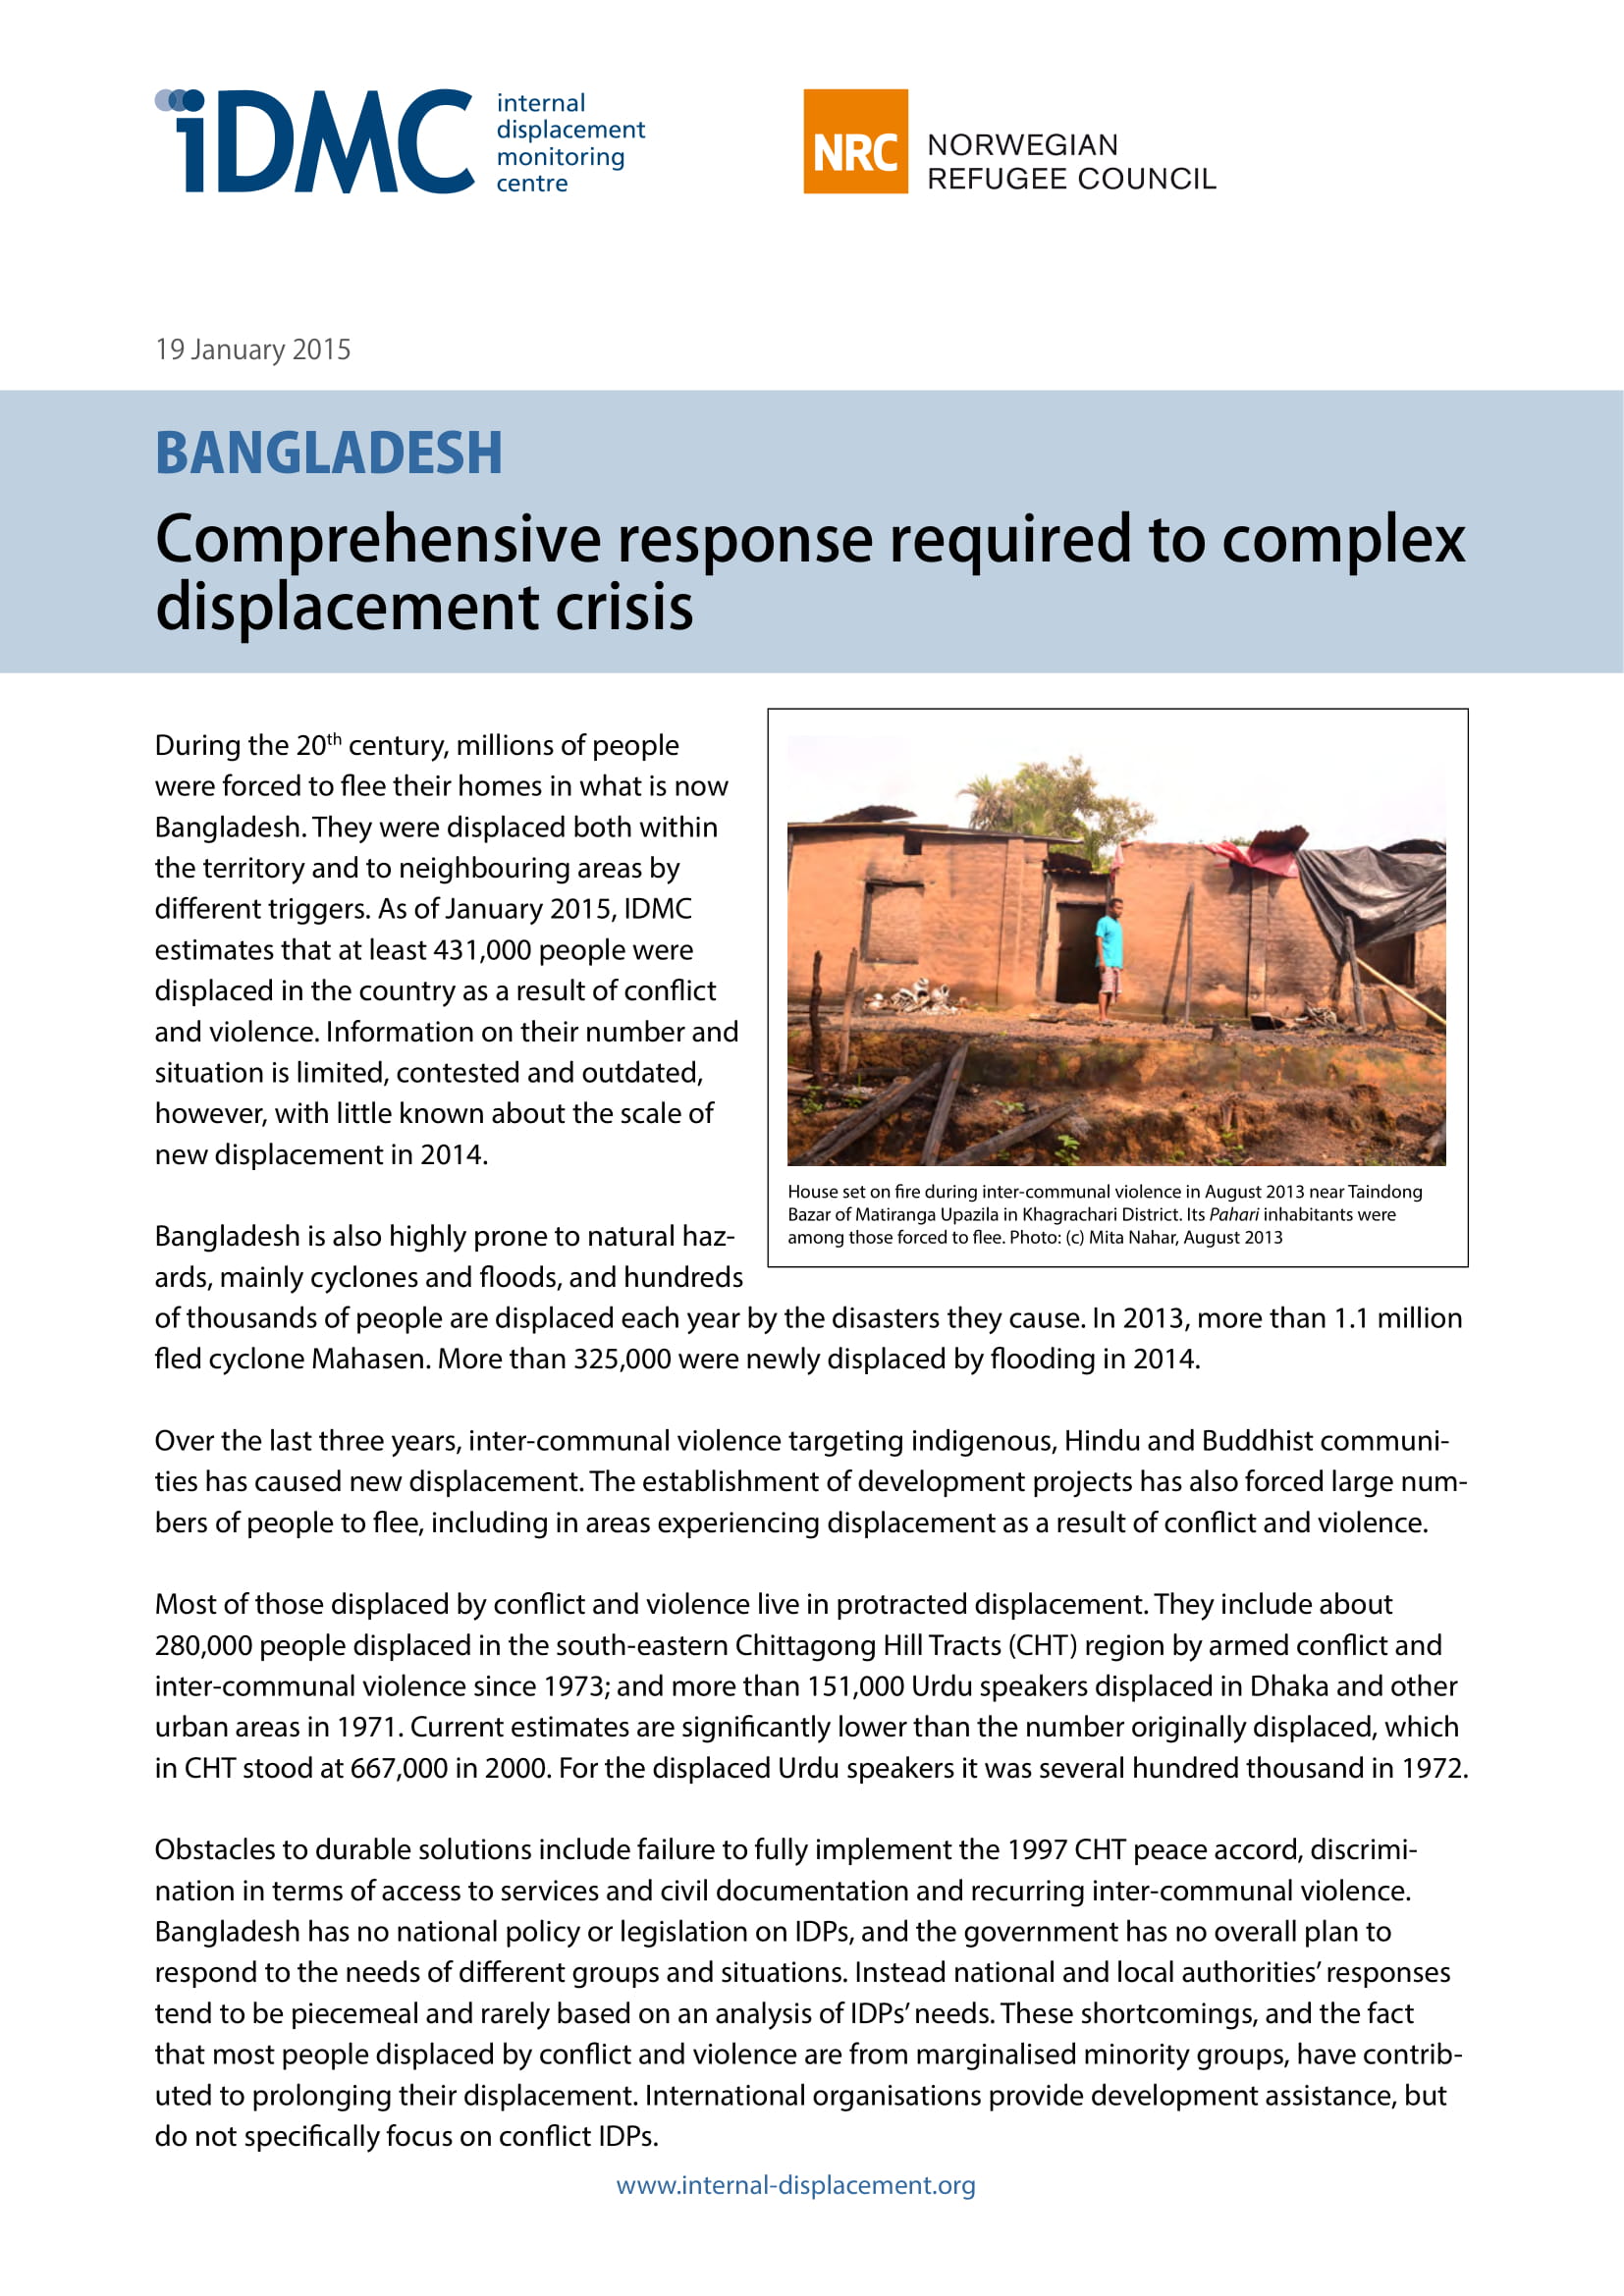 Bangladesh: Comprehensive response required to complex displacement crisis